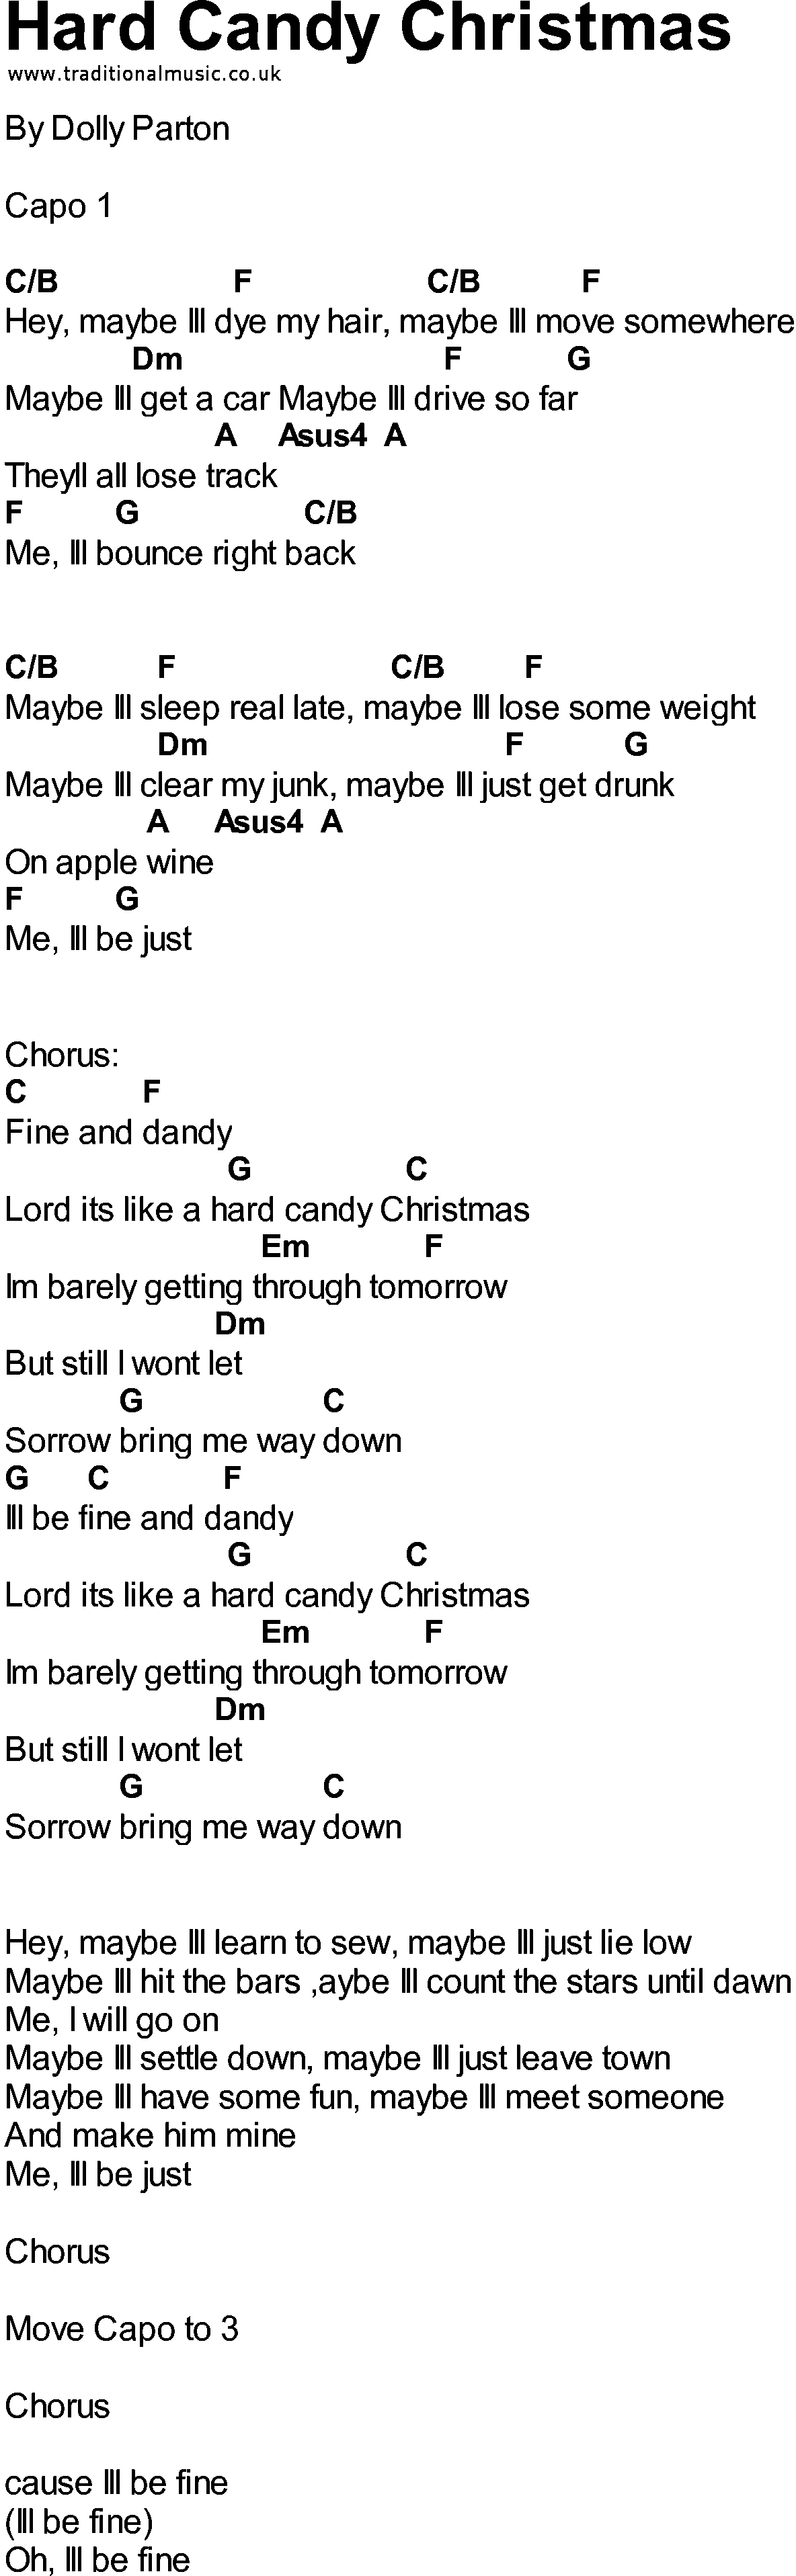 Bluegrass songs with chords - Hard Candy Christmas